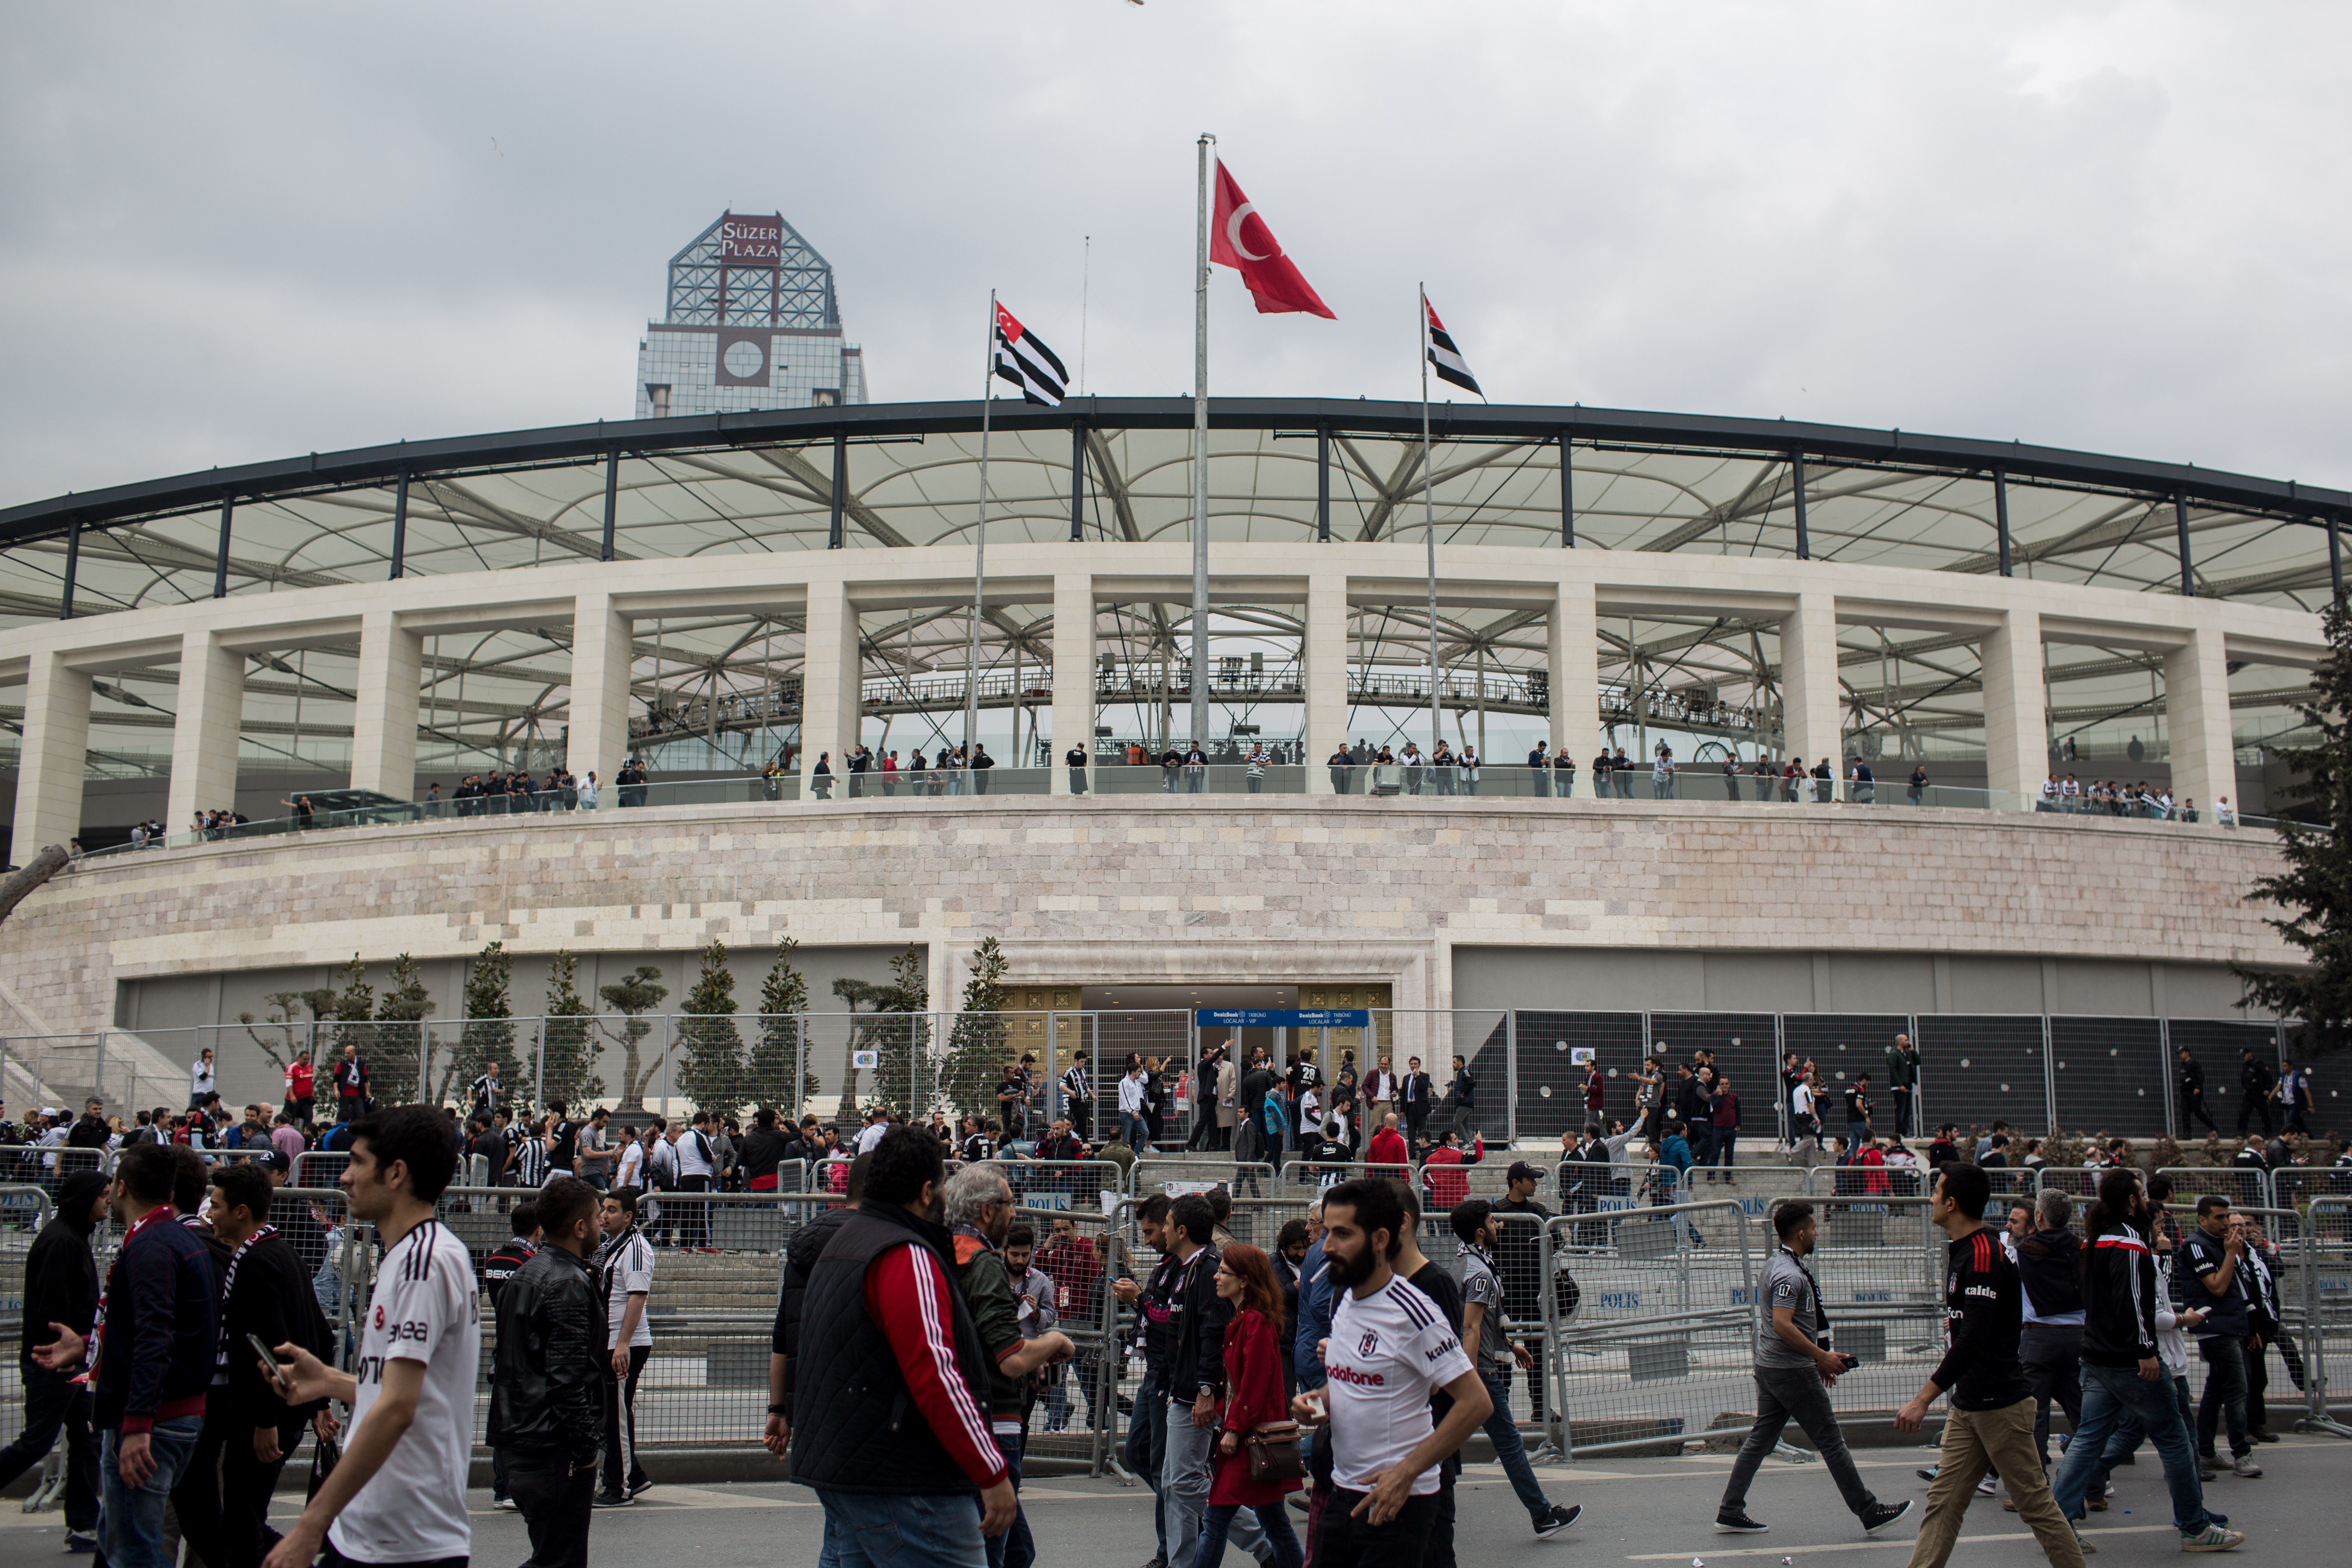 ISTANBUL, TURKEY - APRIL 11:  Besiktas fans arrive for the opening match of the new Vodafone Arena between Besiktas and Bursaspor on April 11, 2016 in Istanbul, Turkey.  The new multi-purpose stadium has an approximate capacity of 42,000 and took more than two years to construct at an estimated cost of 80 million USD. The stadium was built on the site of the old BJK Inonu Stadium and will be the home field for Turkey's leading football team the Besiktas J.K.  (Photo by Chris McGrath/Getty Images)